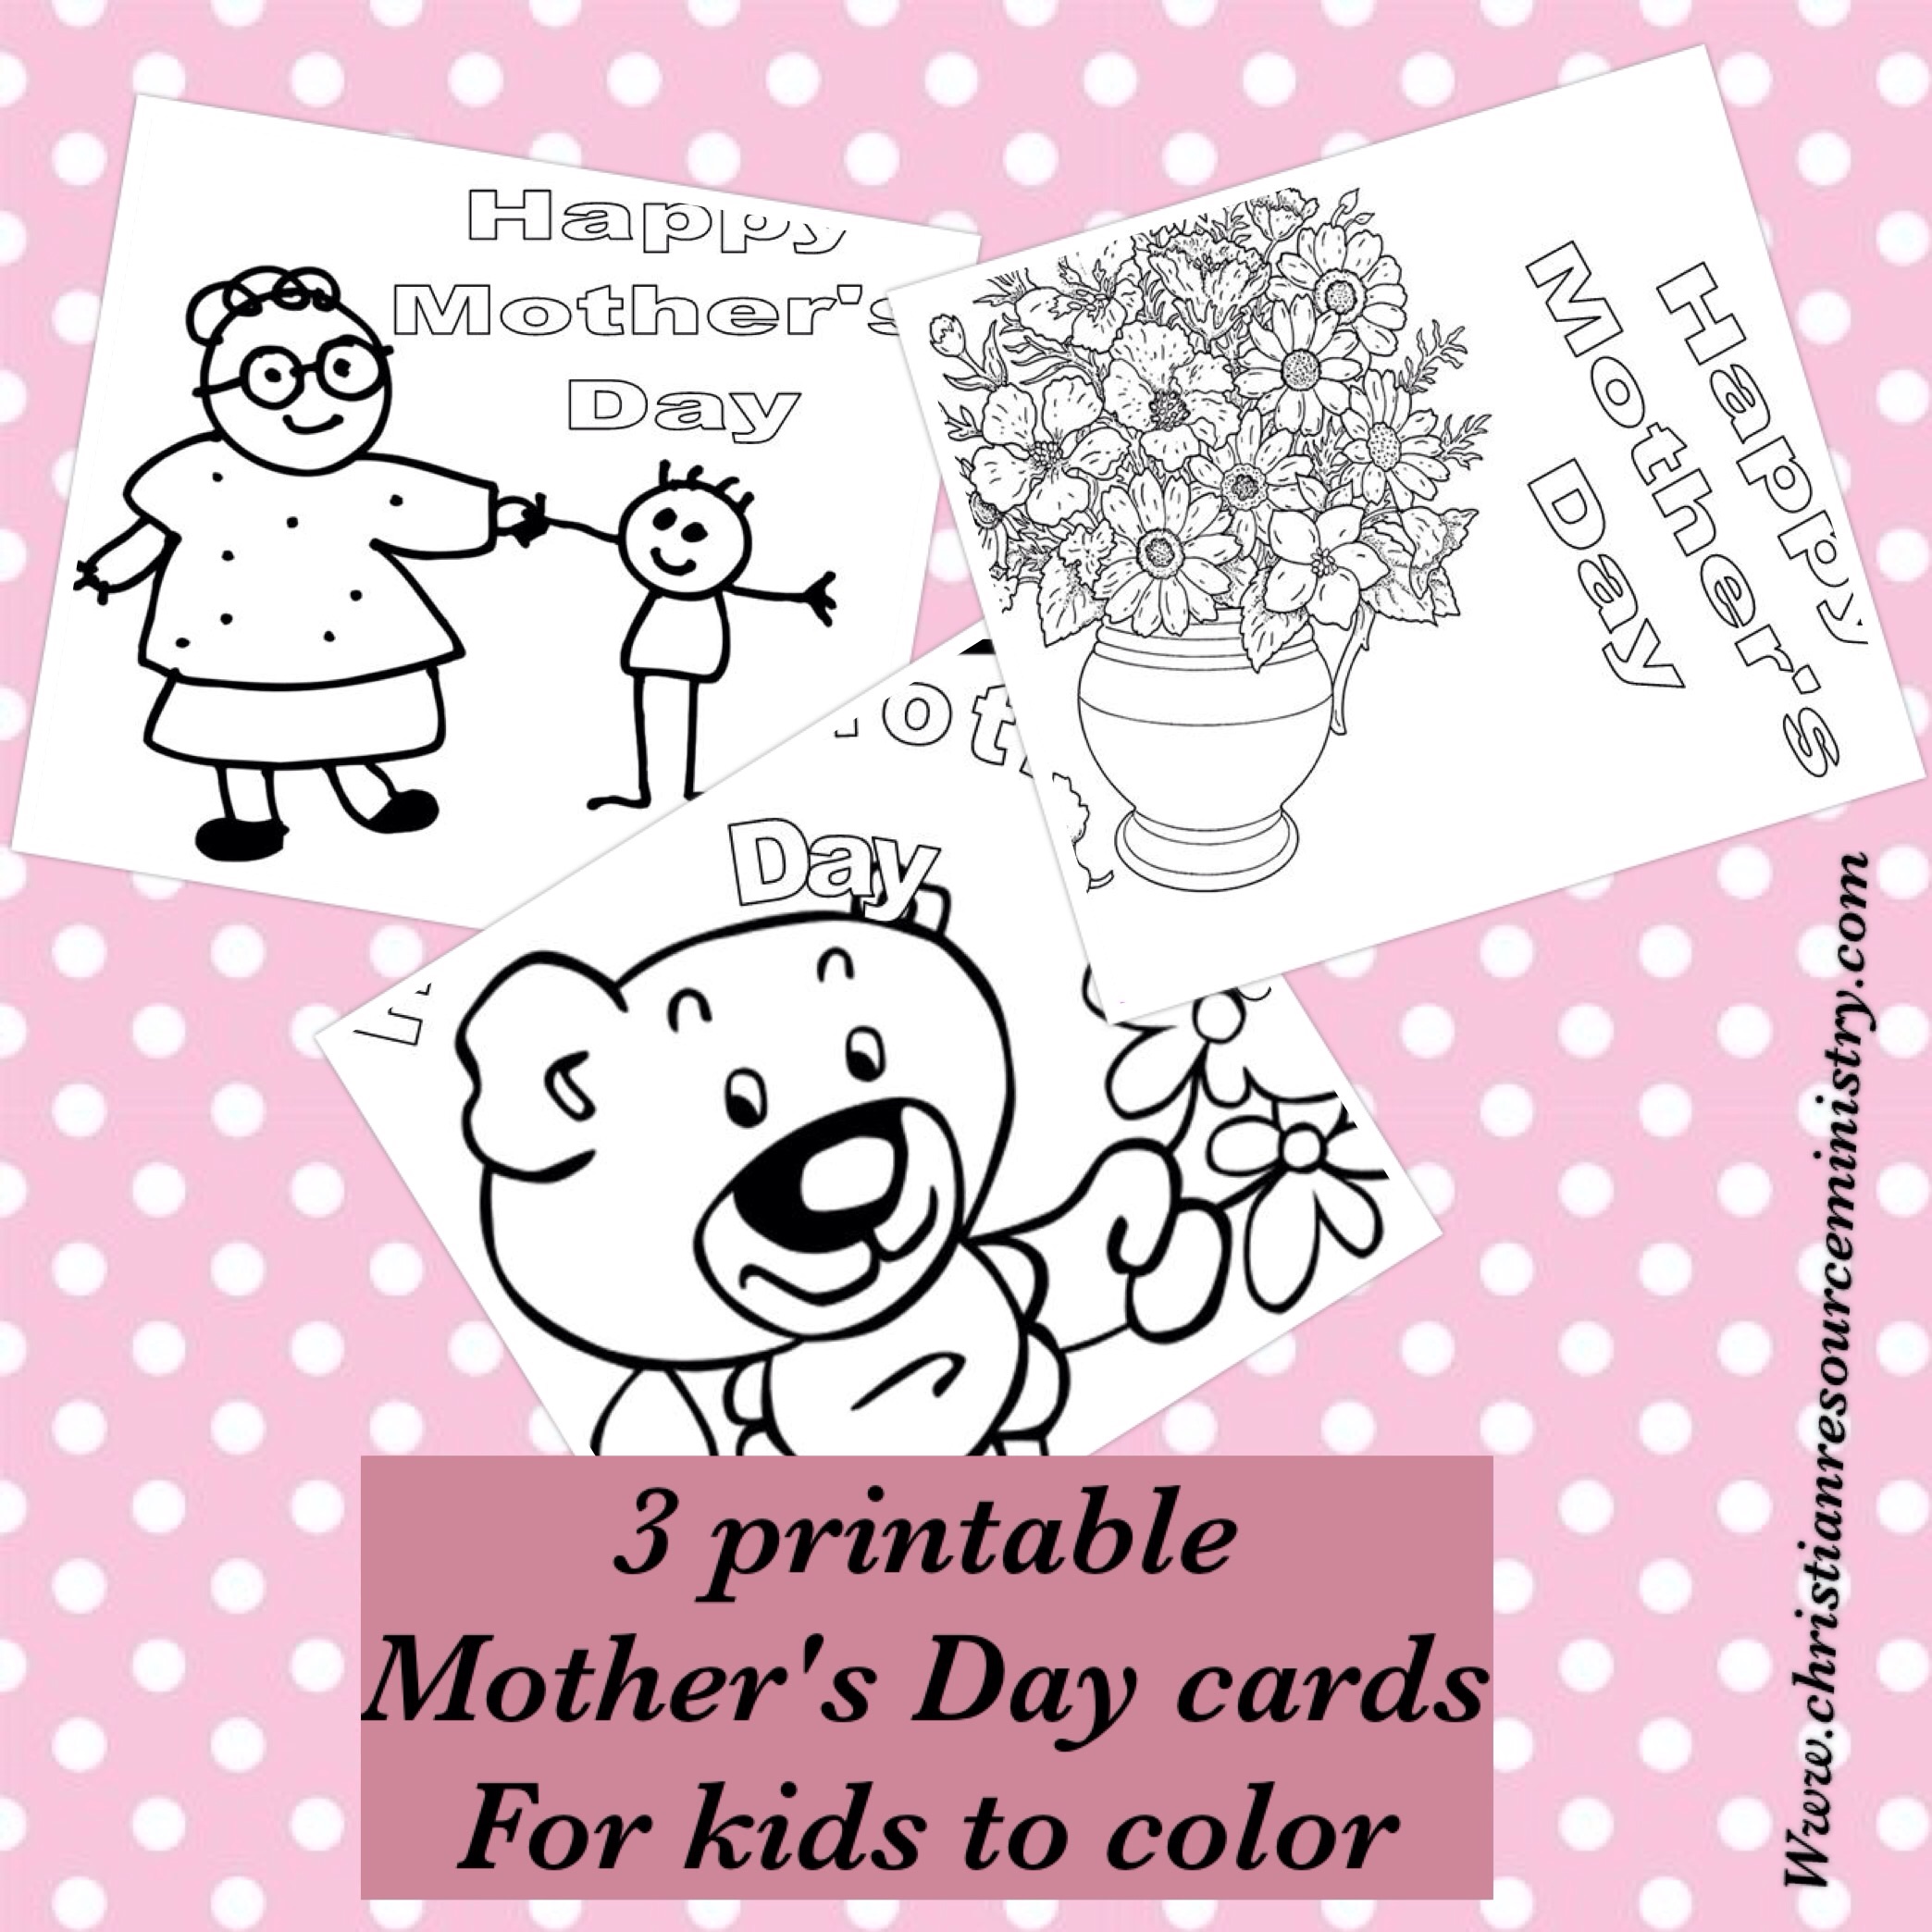 Mothers Day Cards For Kids To Color Us Mother s Day Is Just Around